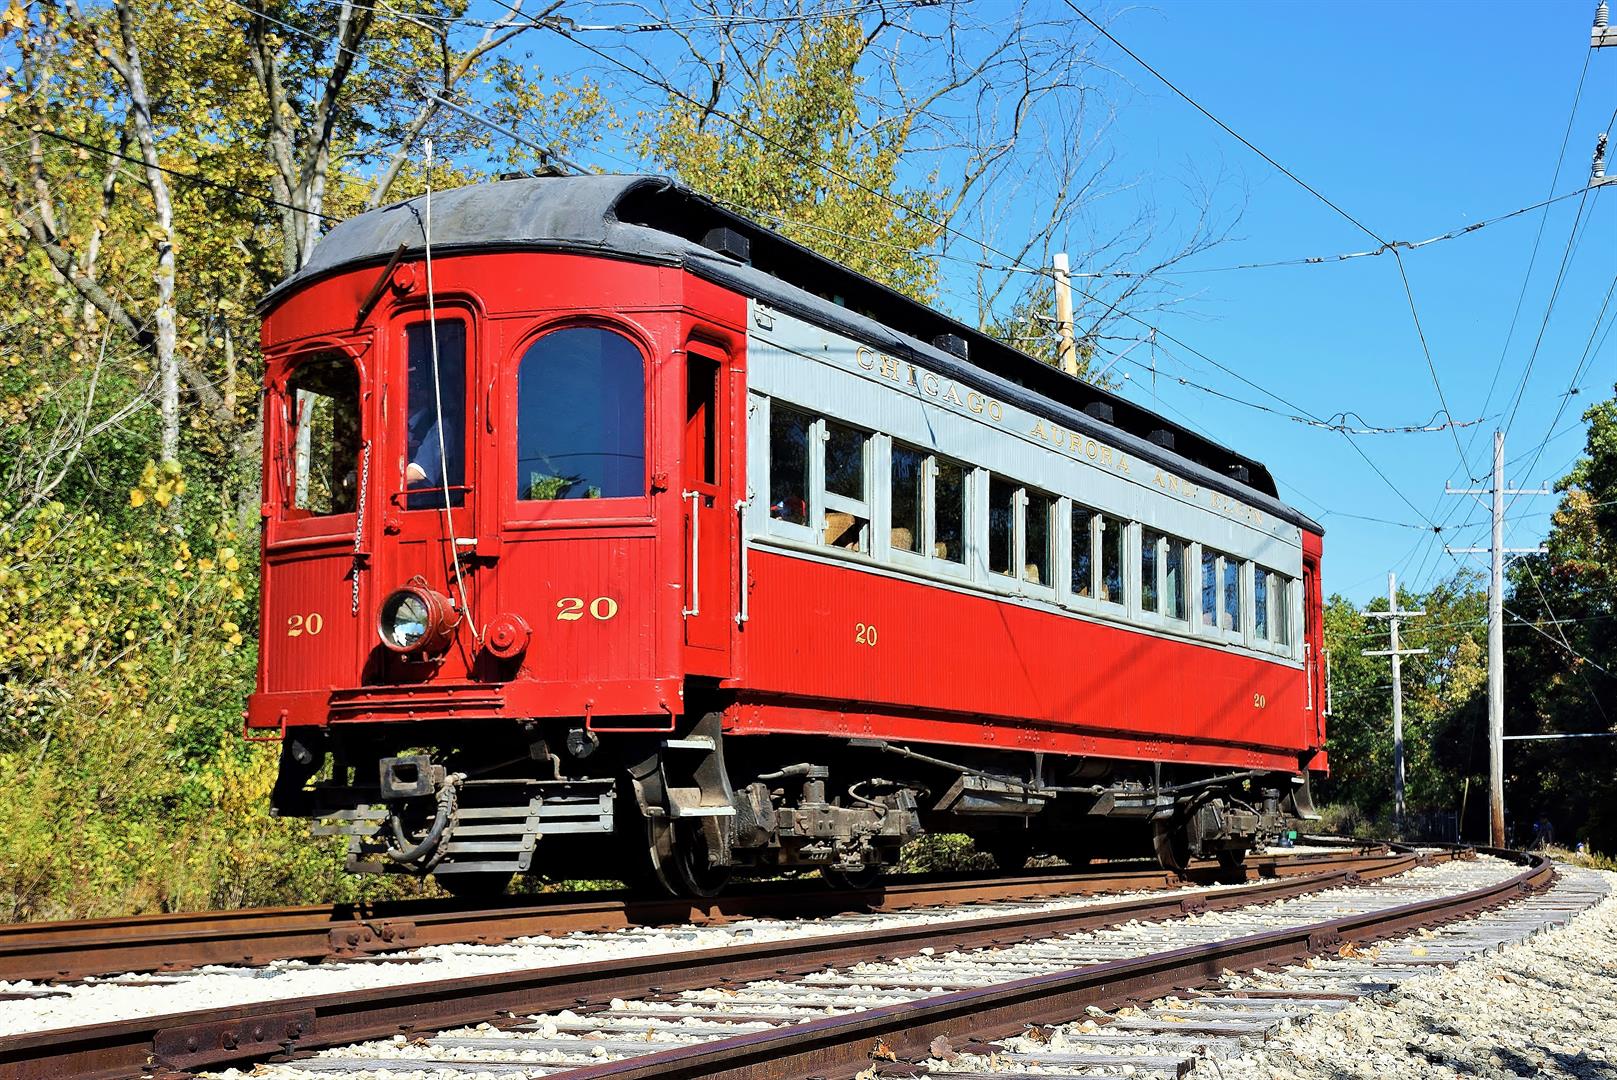 1902 CA&E Car 20 rounds the curve into the Jon Duerr Forest Preserve